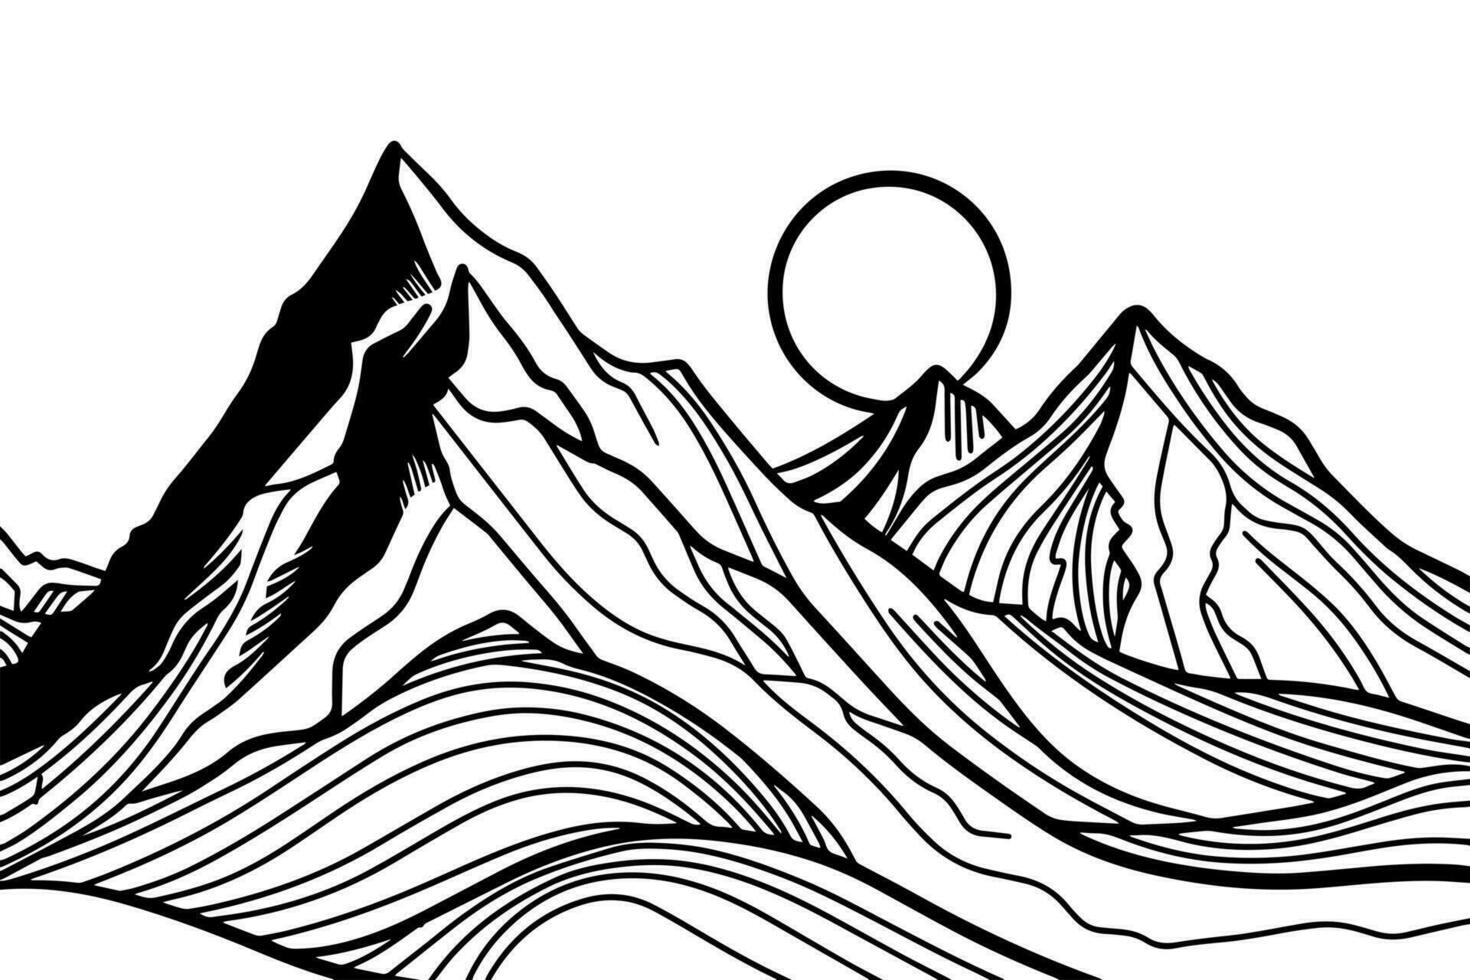 creative minimalist modern line art print. Abstract mountain contemporary aesthetic background landscape. vector